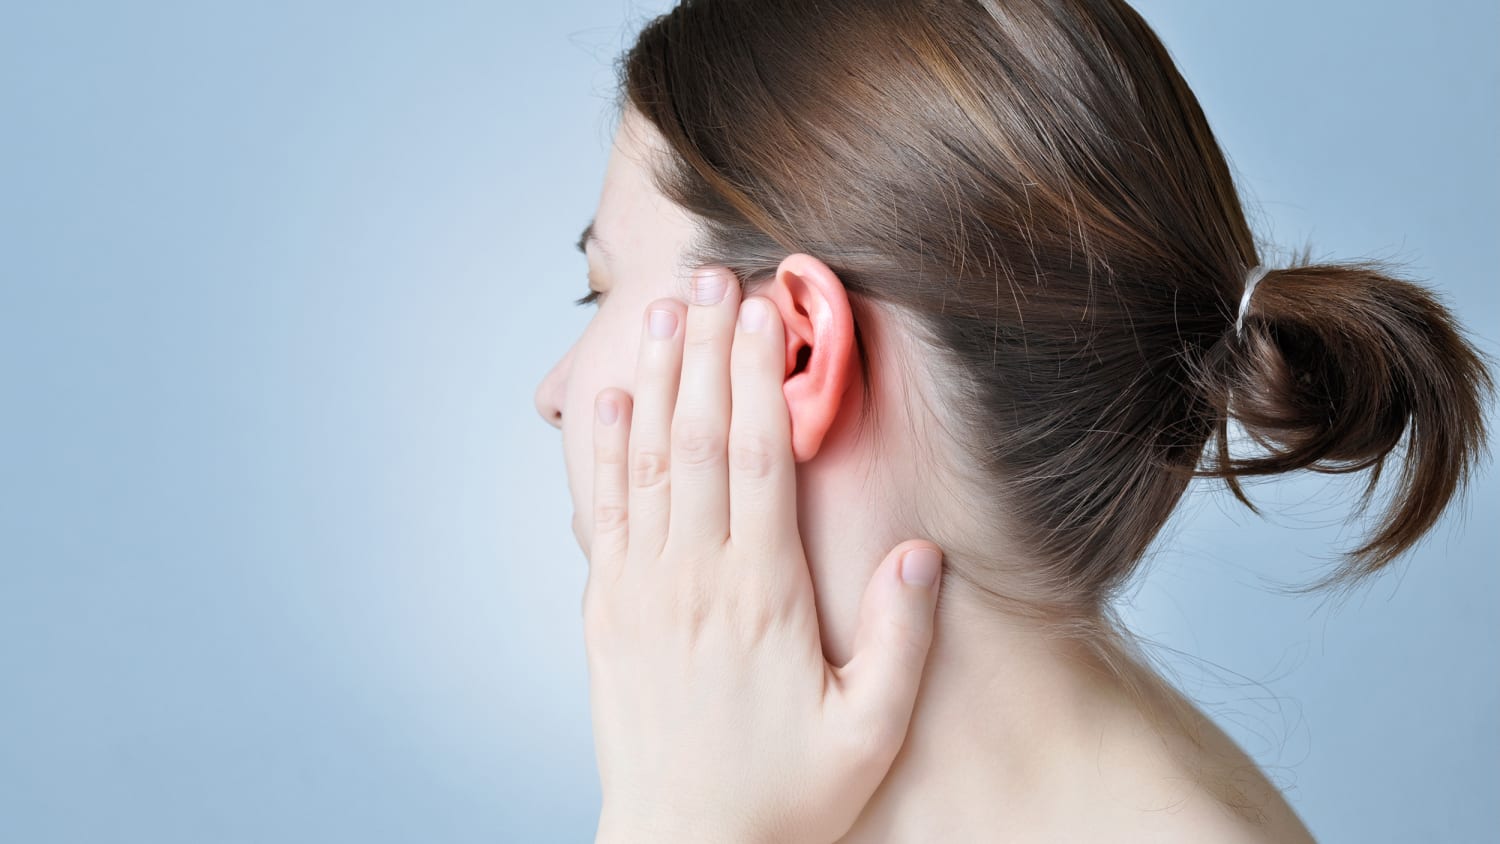 Pierced ear infections: Symptoms, causes and treatments